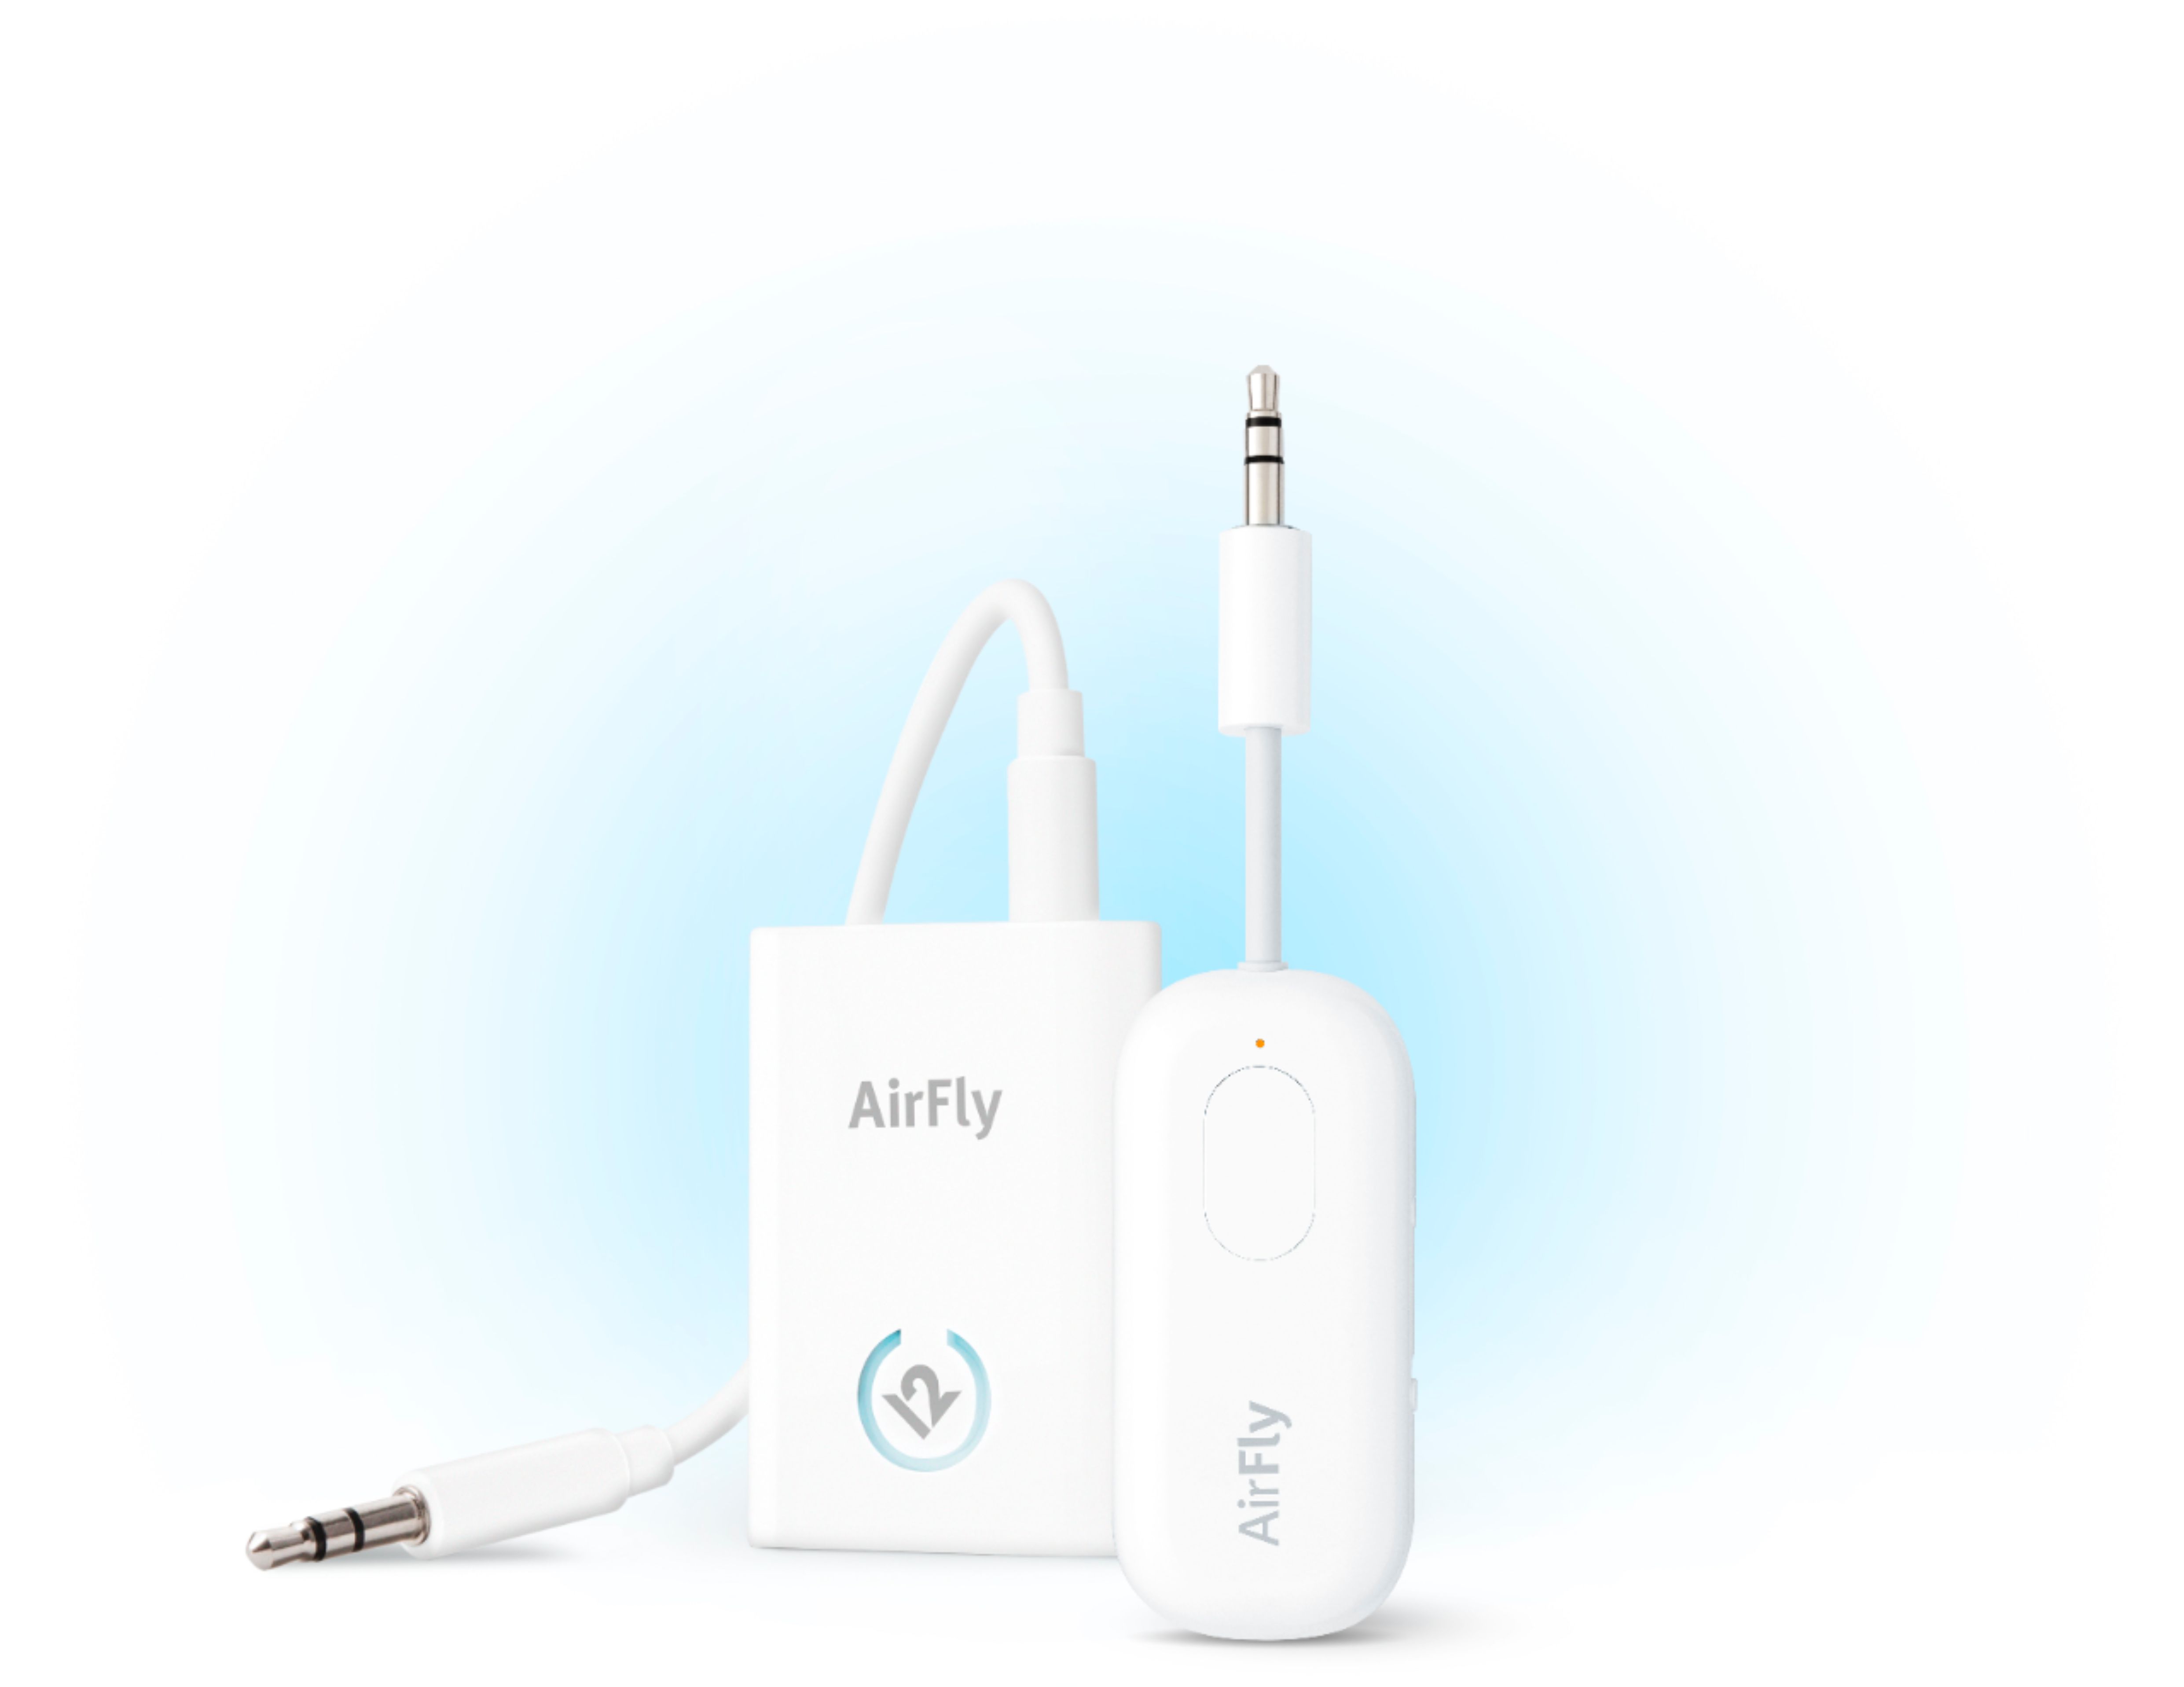  Twelve South AirFly Pro Bluetooth Wireless Audio Transmitter/  Receiver for up to 2 AirPods /Wireless Headphones; Use with any 3.5 mm Jack  on Airplanes, Gym Equipment, TVs, iPad/Tablets and Auto 